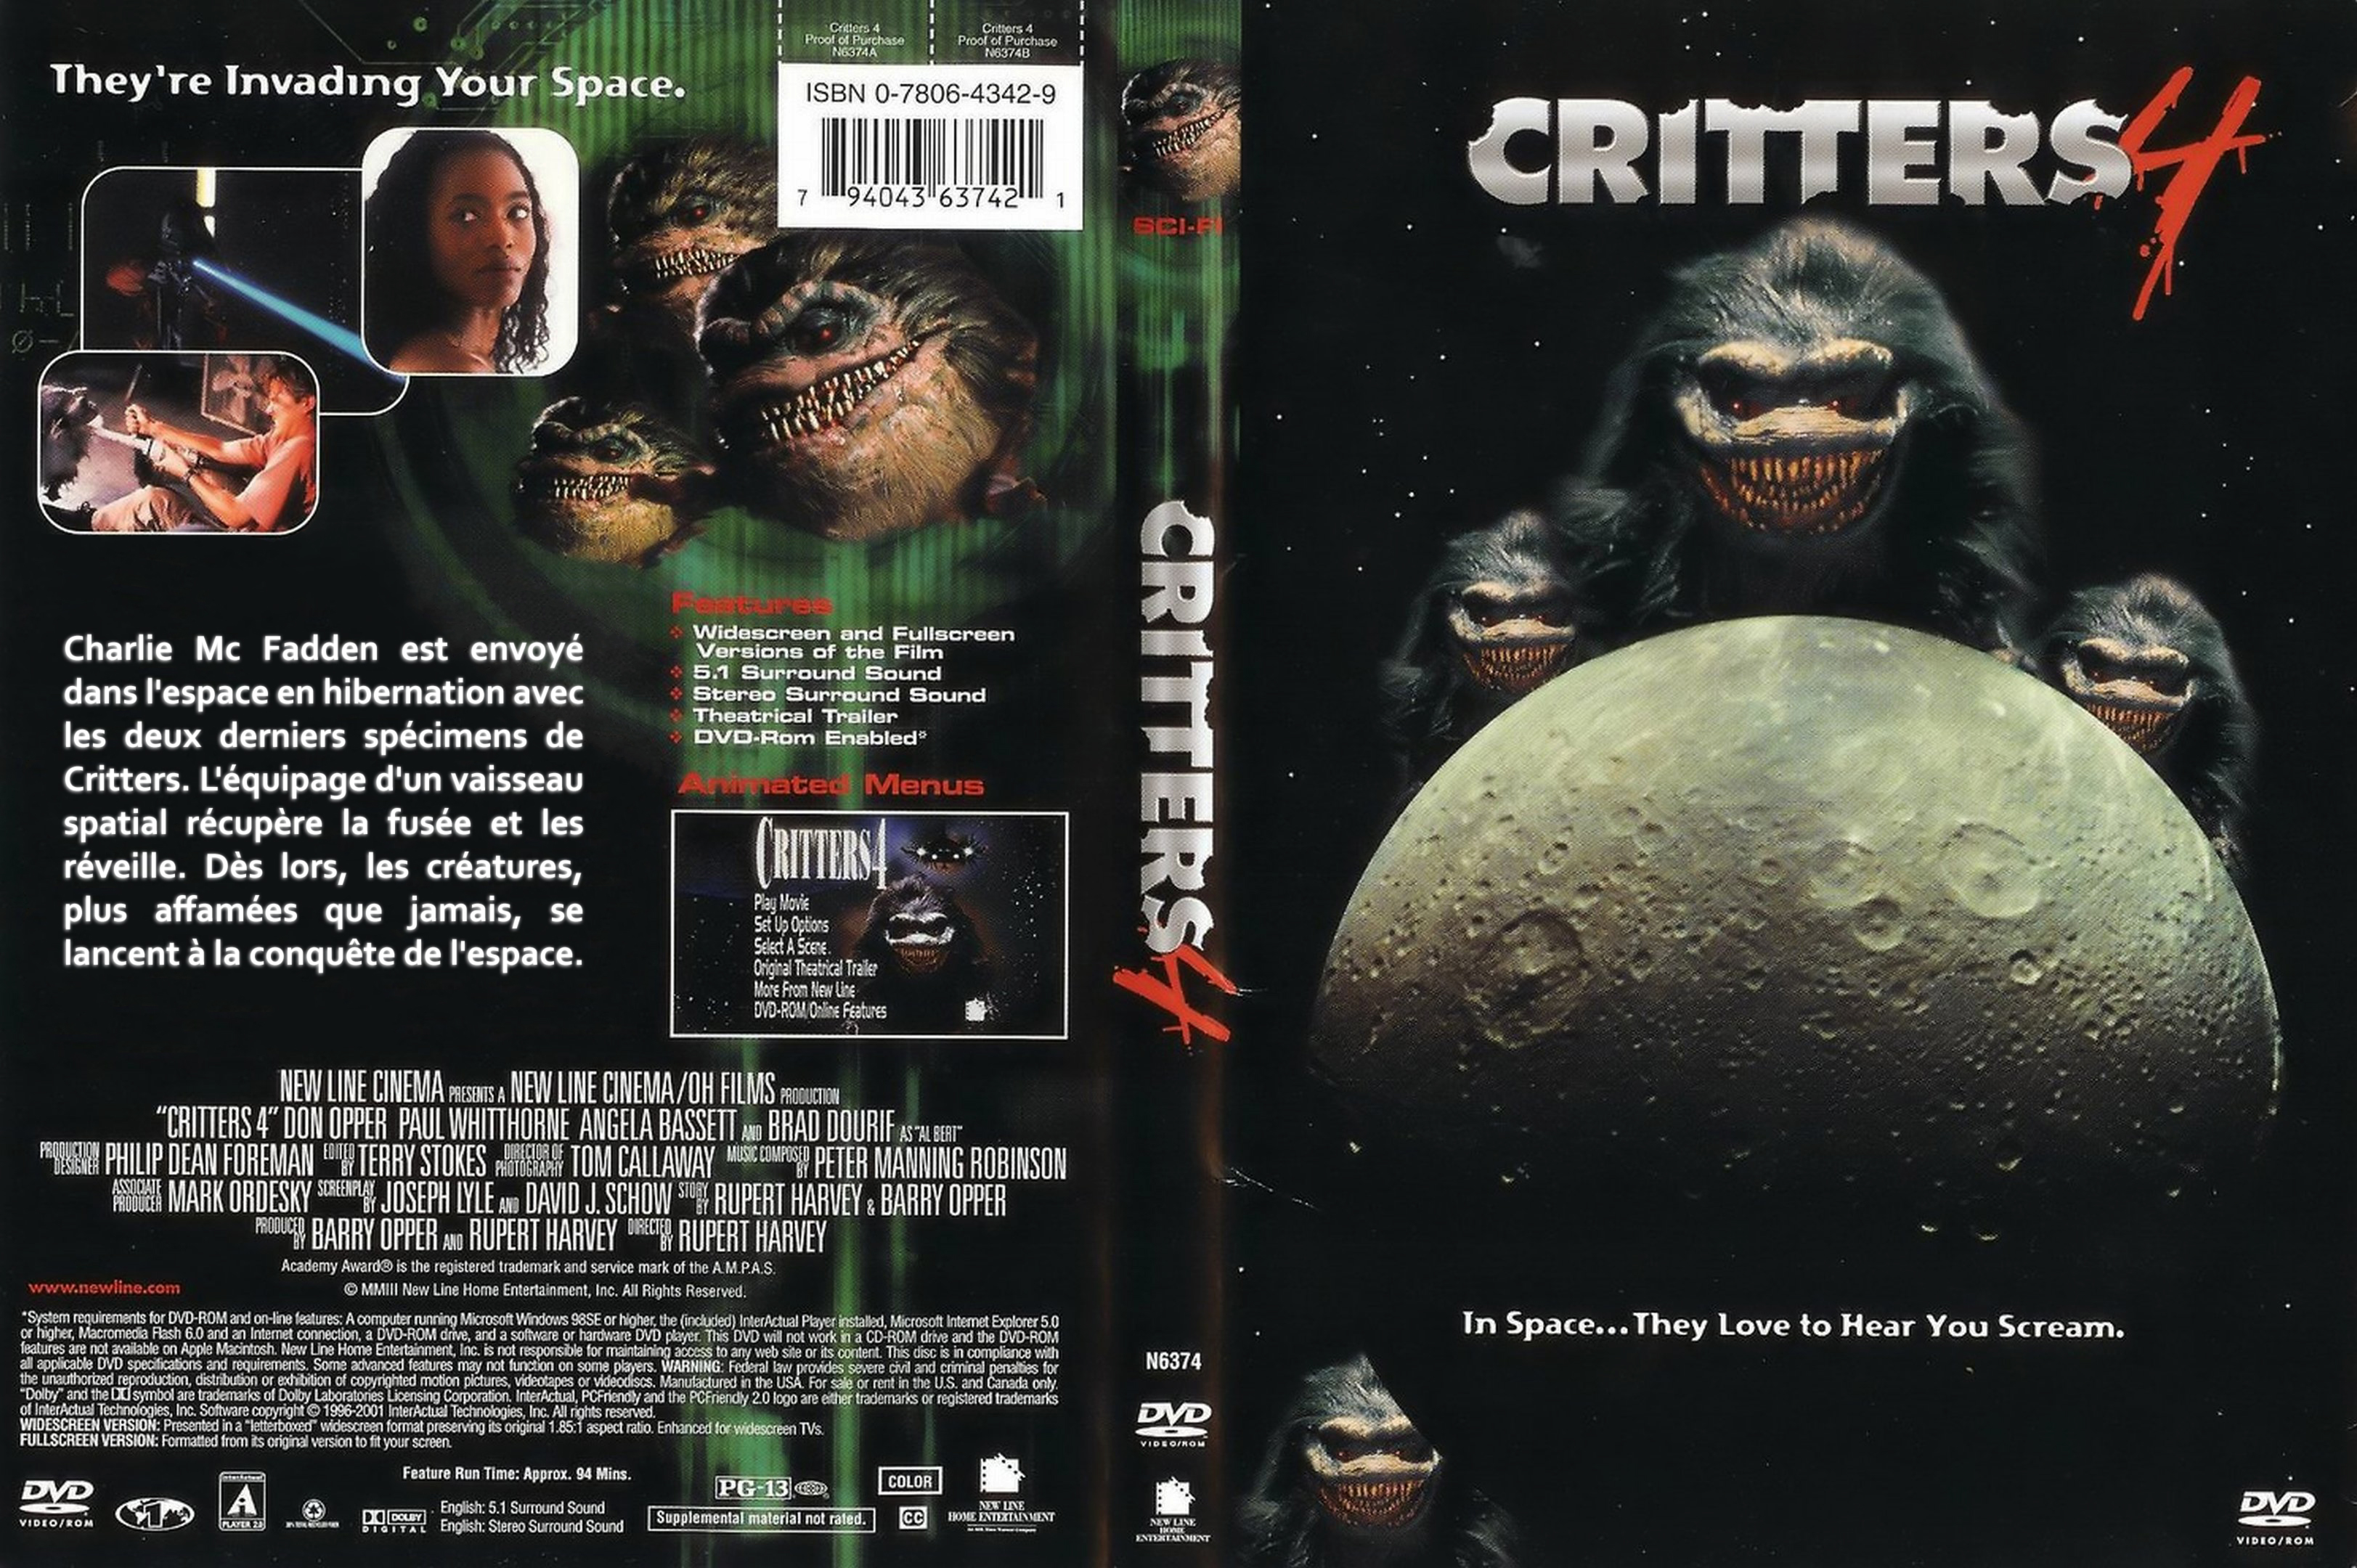 Jaquette DVD Critters 4 (Canadienne)